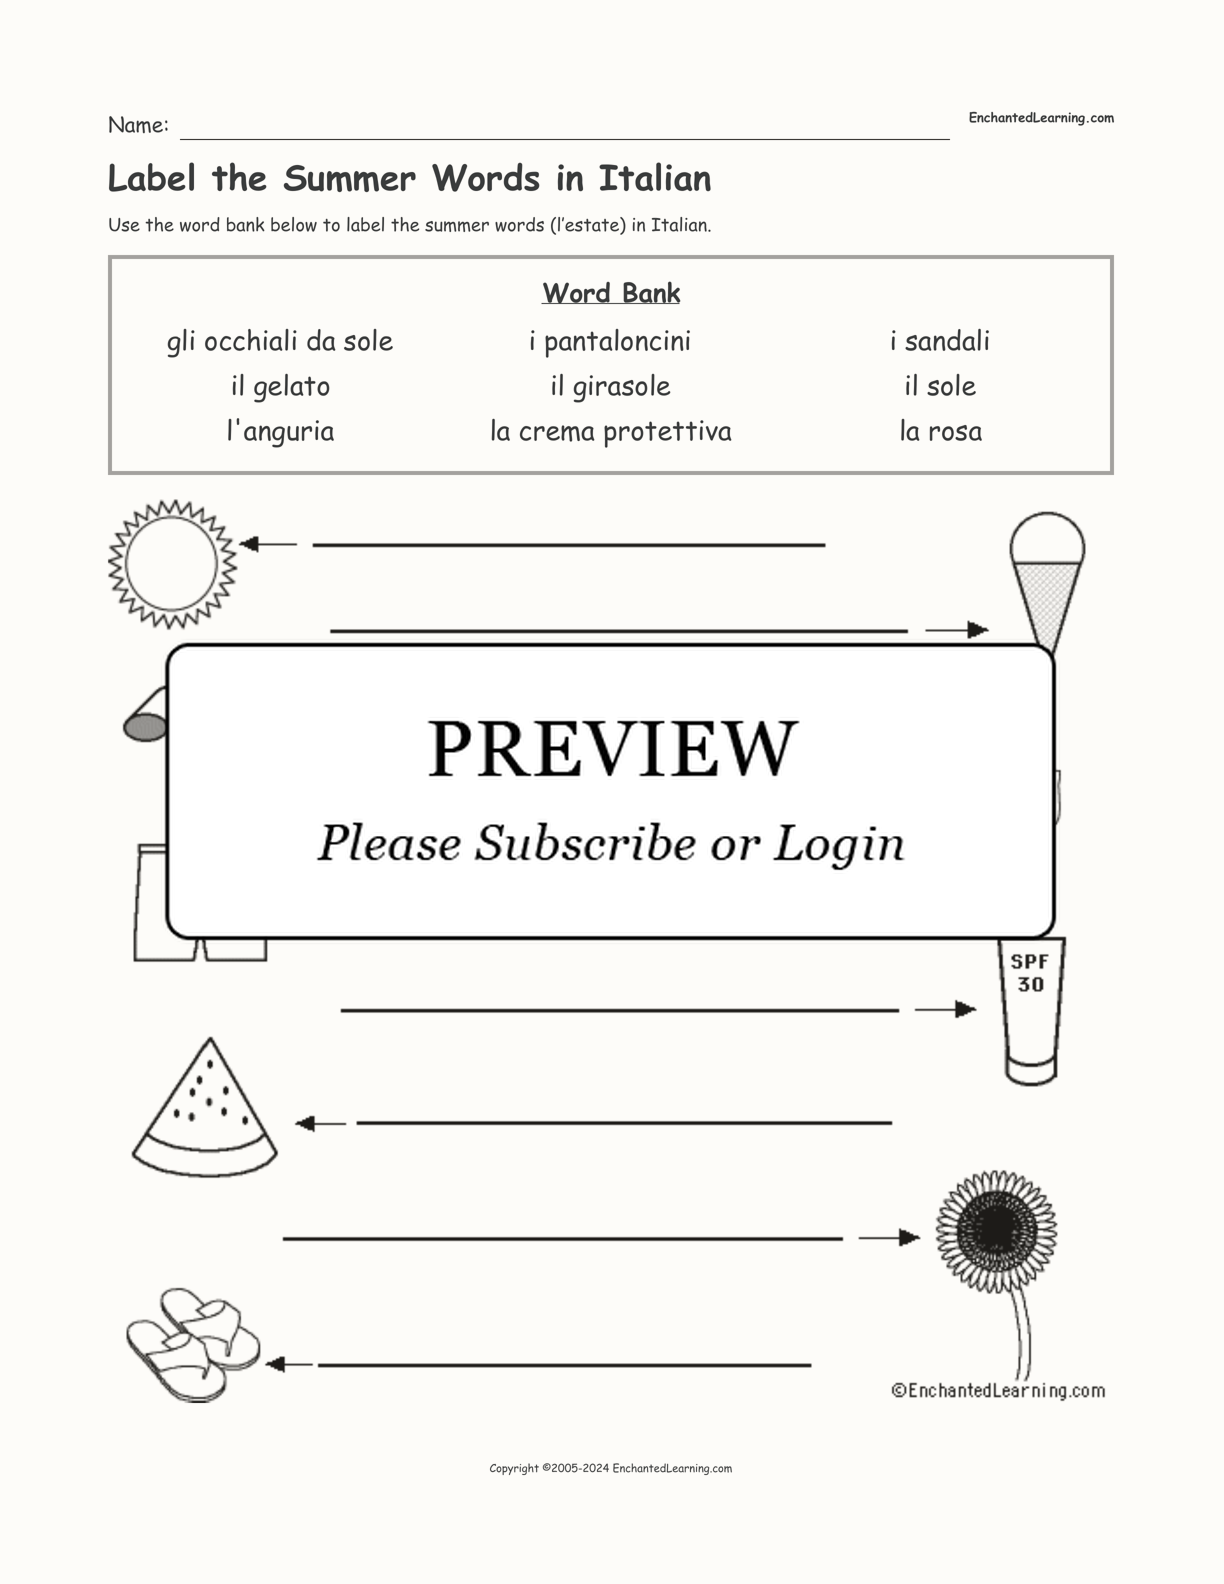 Label the Summer Words in Italian interactive worksheet page 1